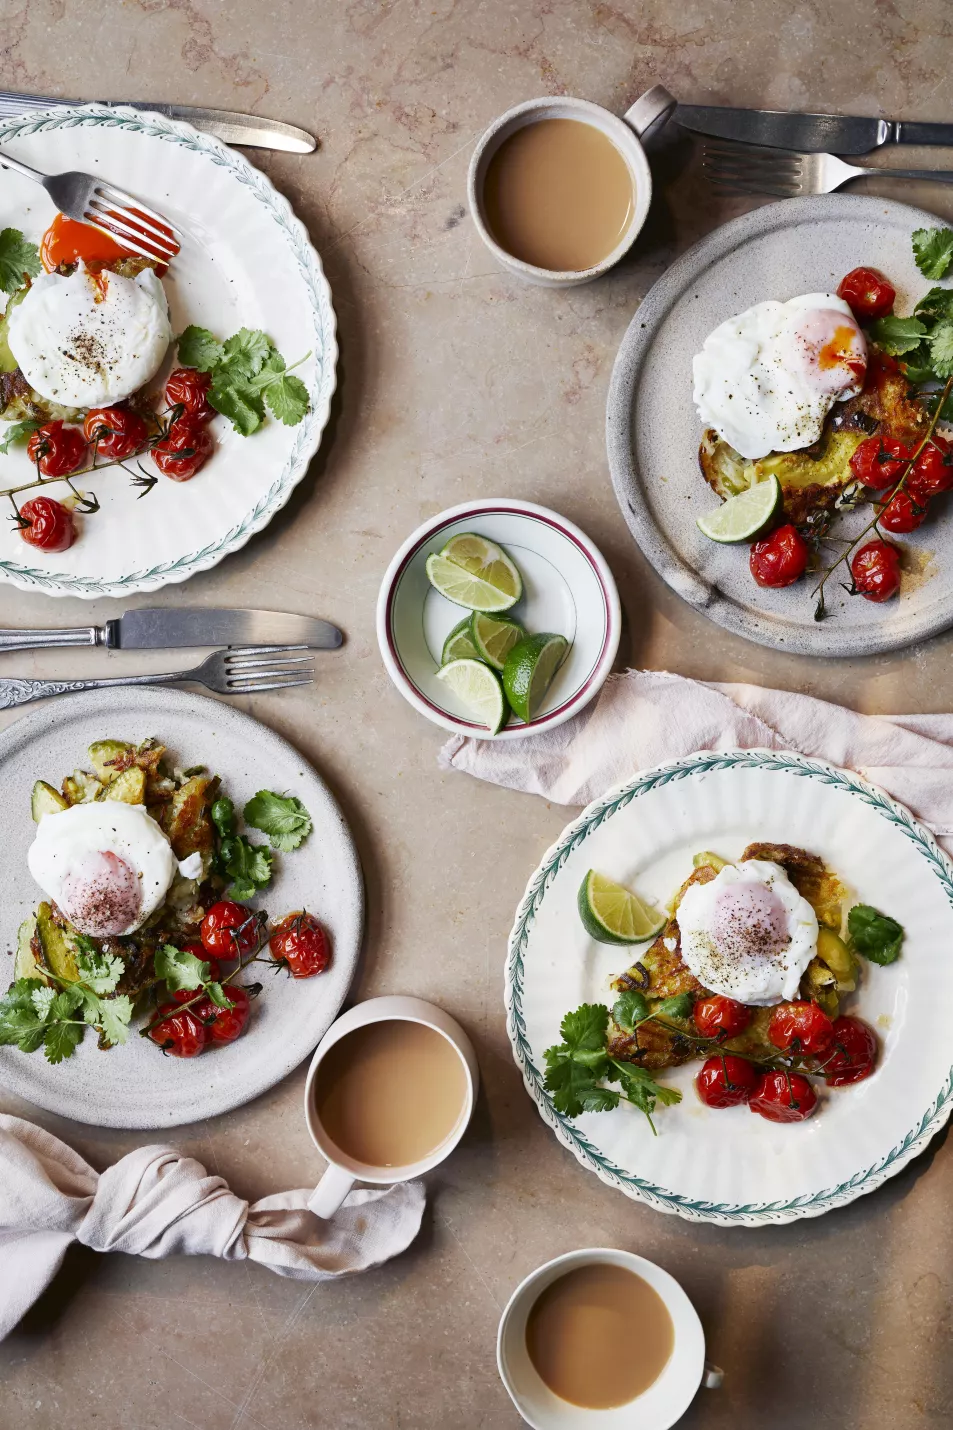 Jamie Oliver's avocado and jalapeno hash brown with poached eggs recipe